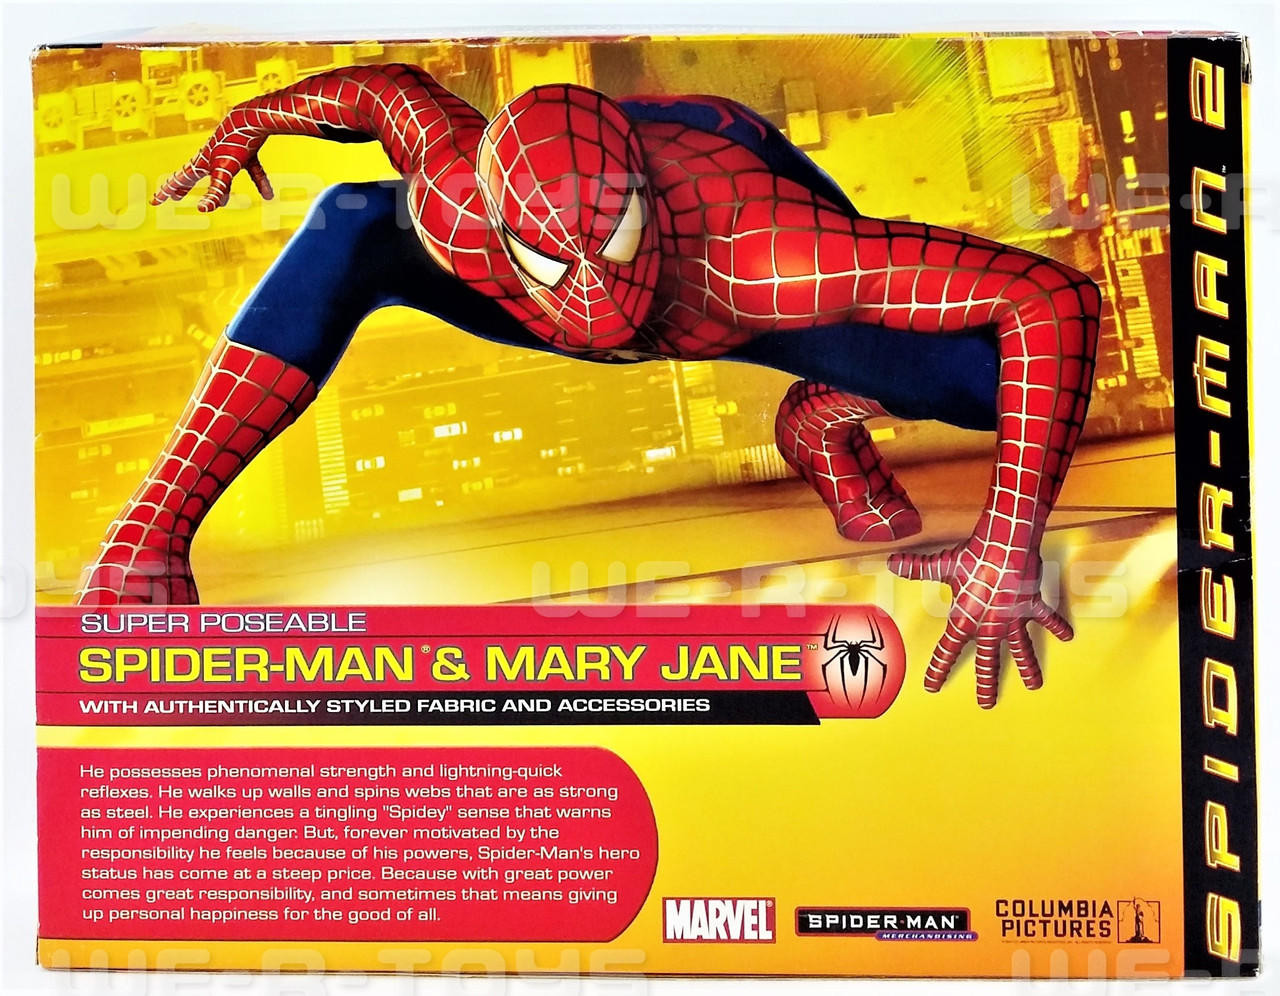 Marvel's Spider-Man 2 Review - 2 Spider-Man, 1 Furious